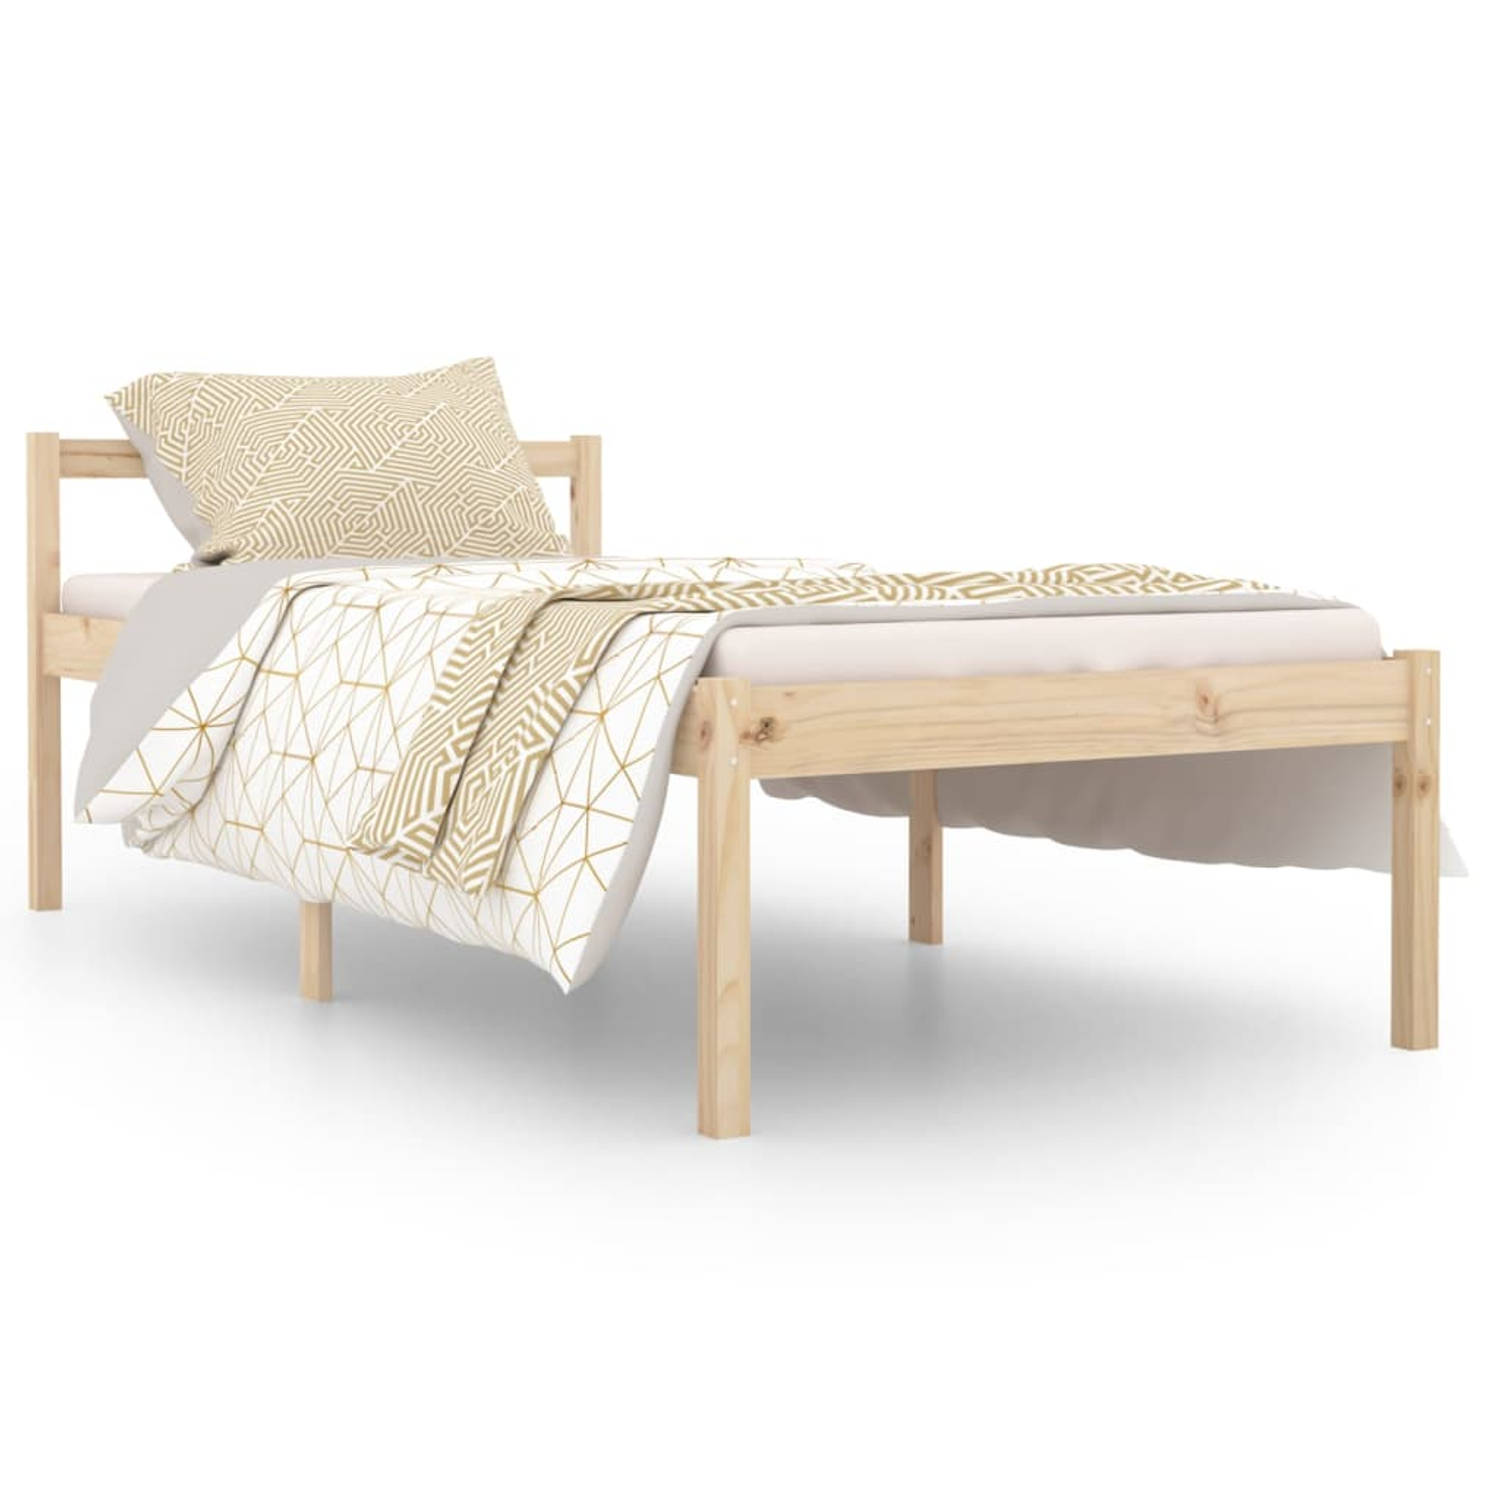 The Living Store Bedframe massief grenenhout 90x190 cm 3FT single - Bed